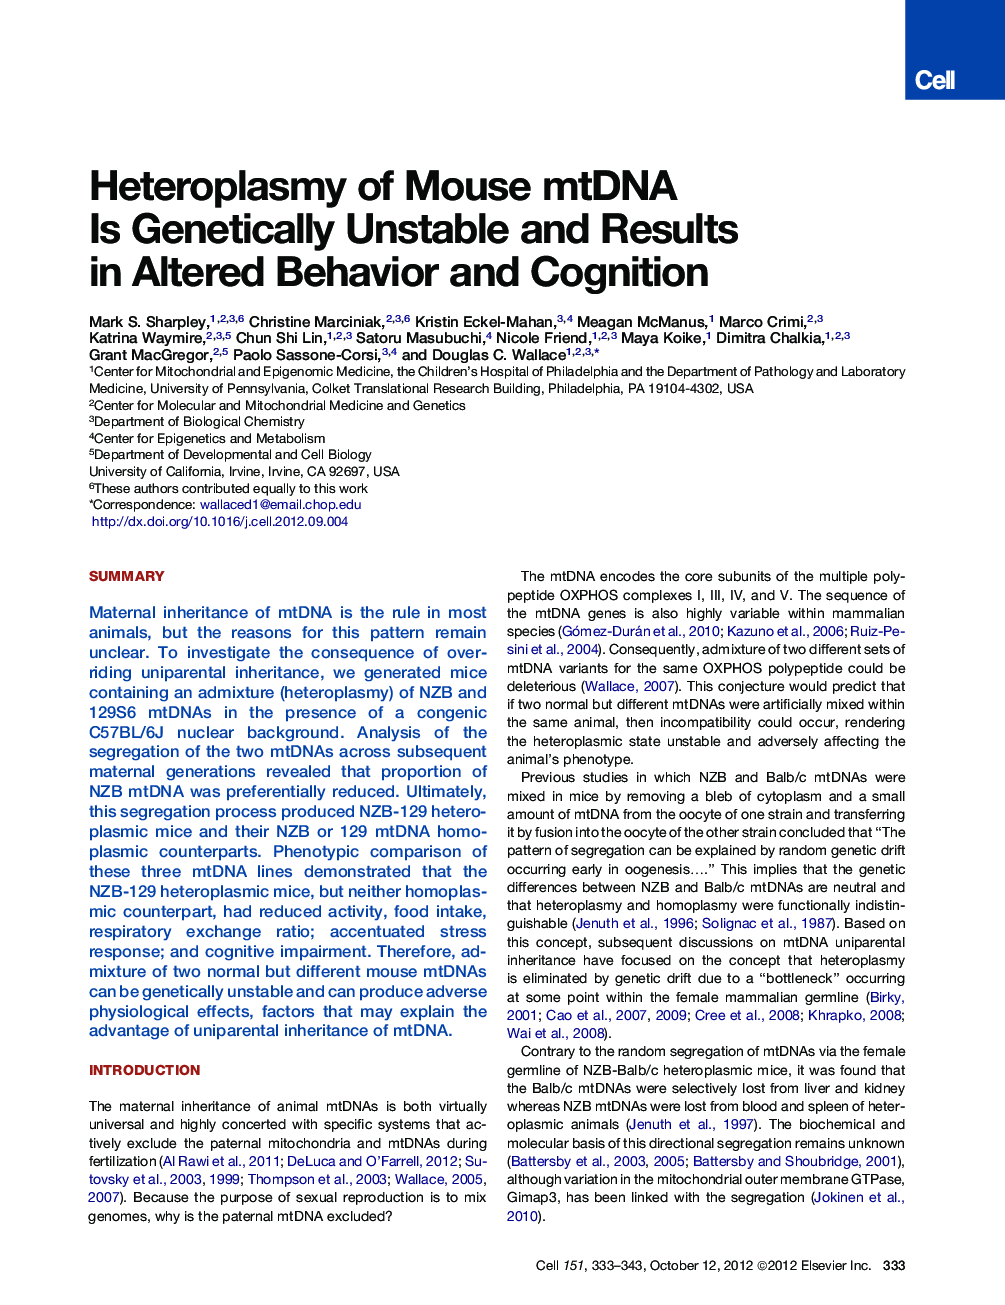 Heteroplasmy of Mouse mtDNA Is Genetically Unstable and Results in Altered Behavior and Cognition